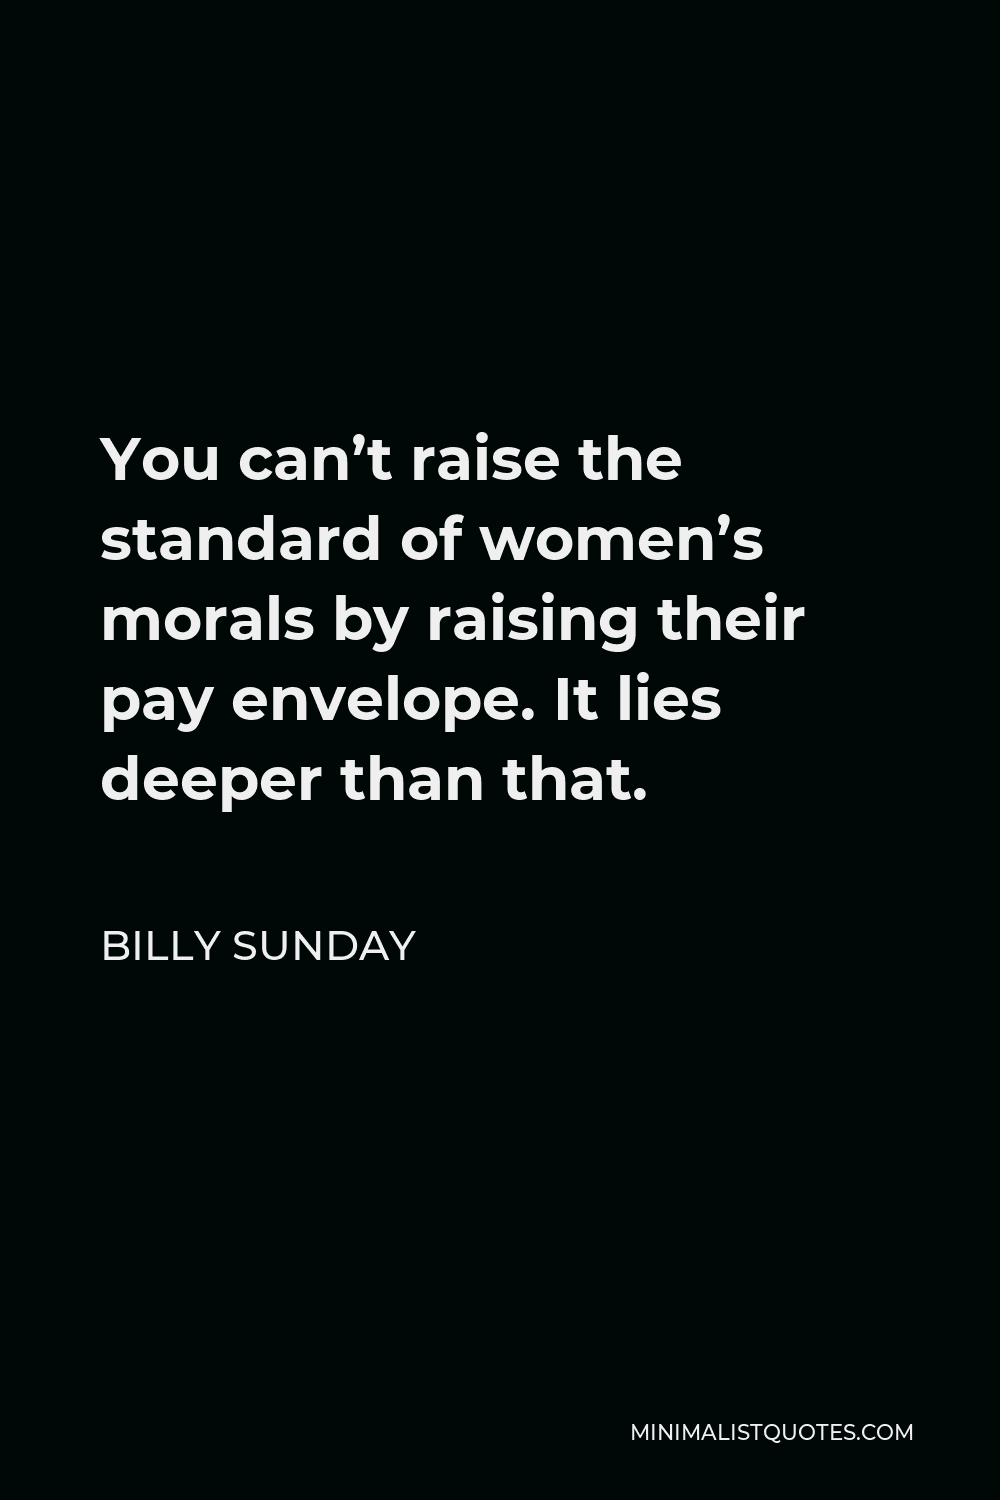 Billy Sunday Quote - You can’t raise the standard of women’s morals by raising their pay envelope. It lies deeper than that.